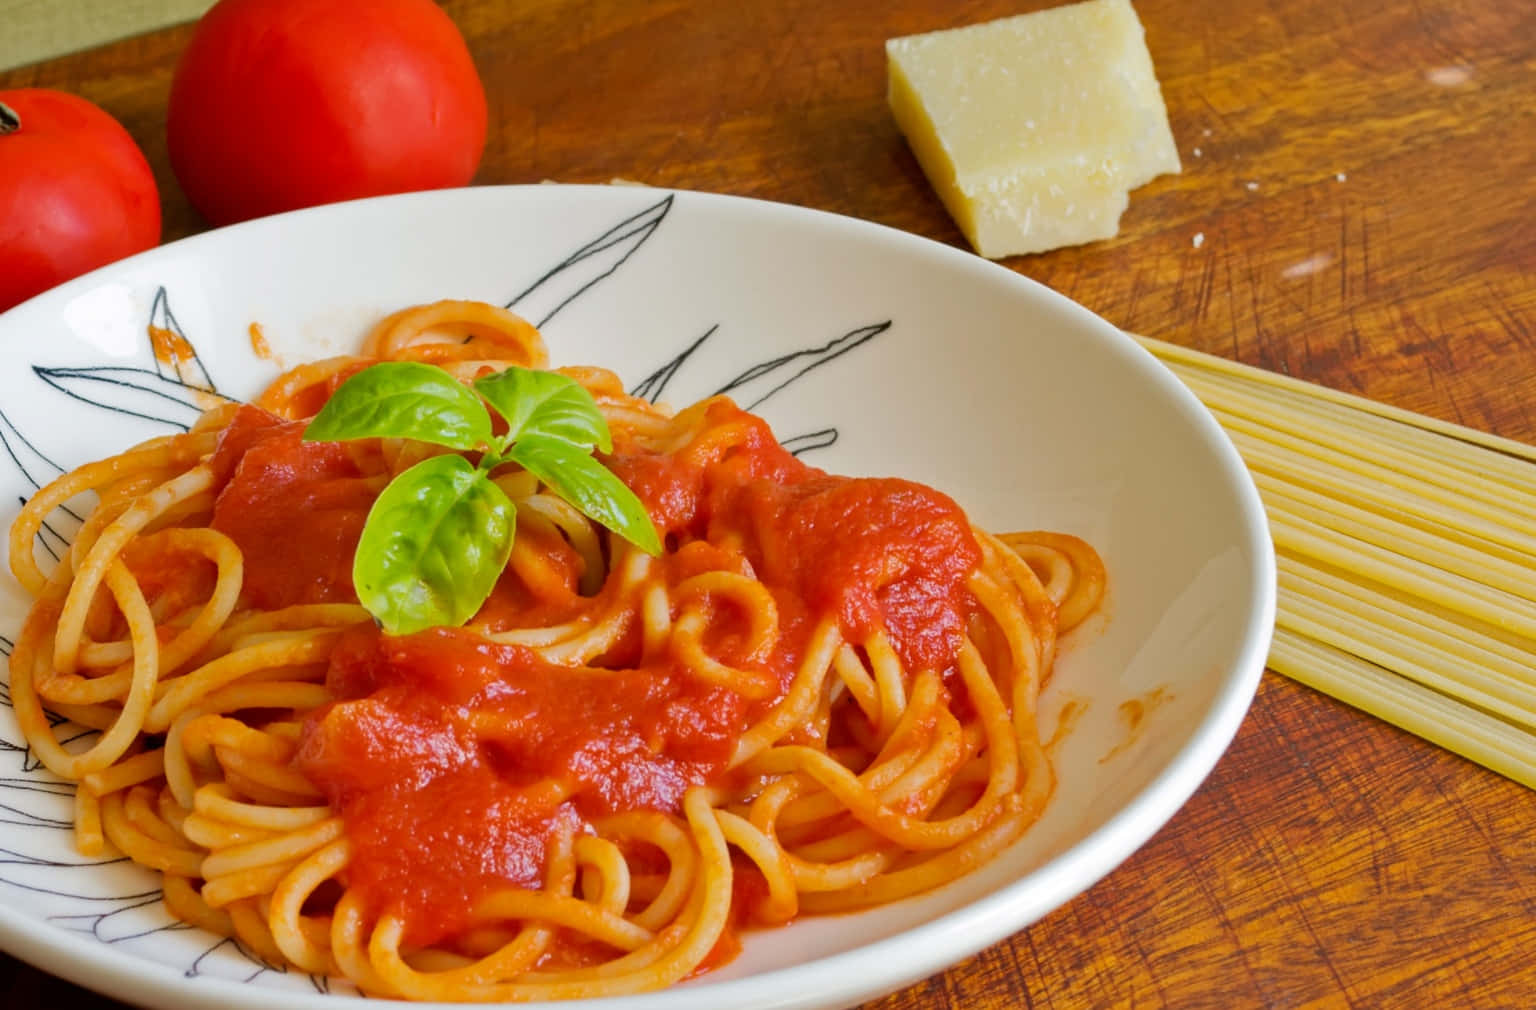 A Bowl Of Spaghetti With Tomato Sauce And Tomatoes